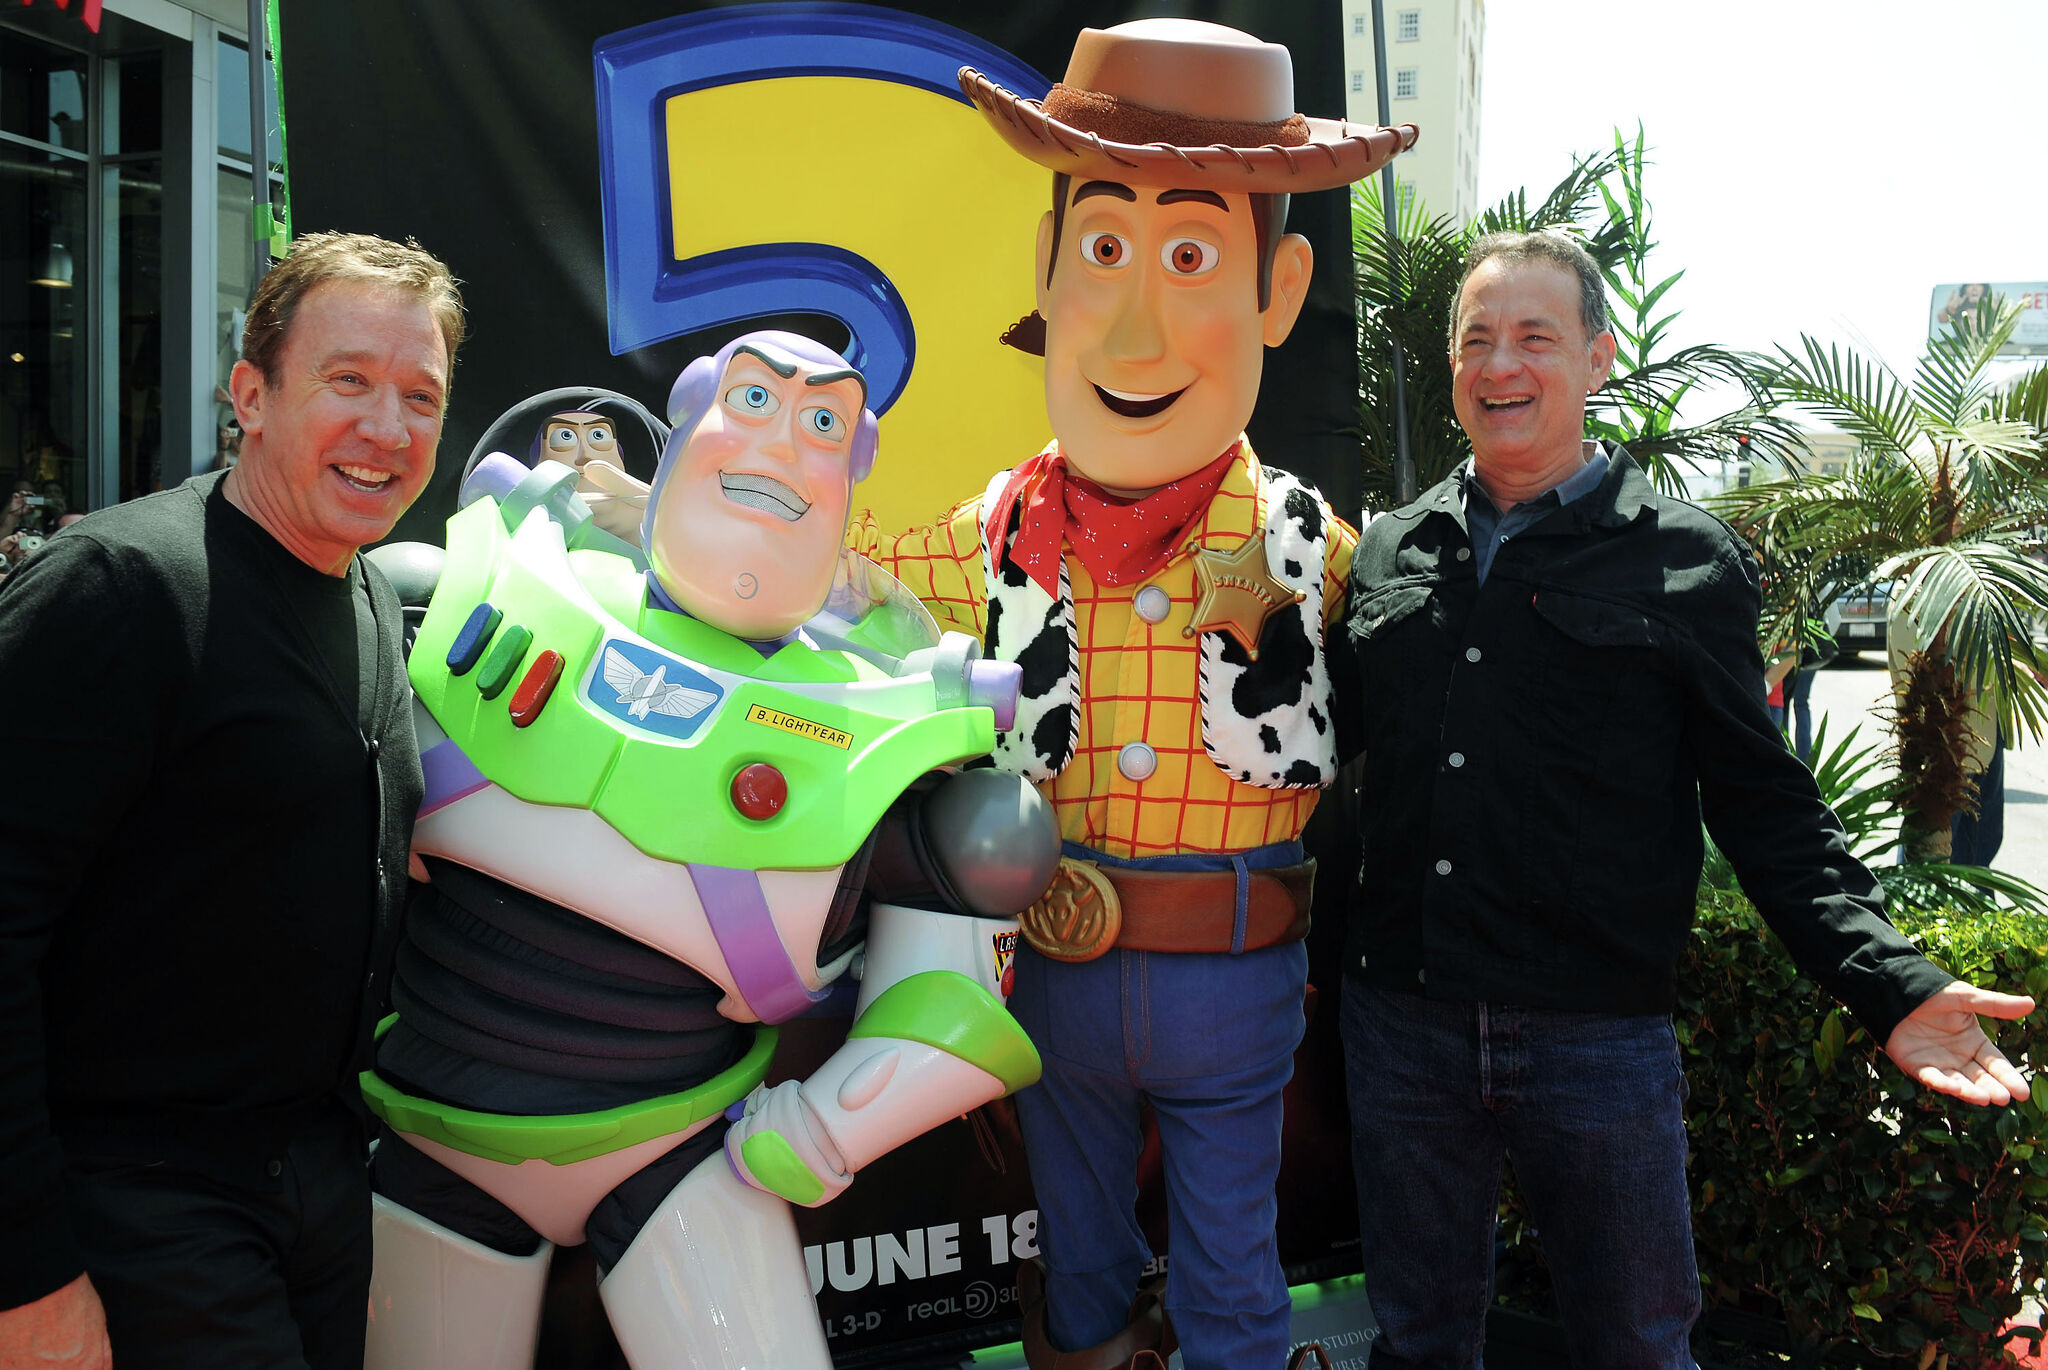 toy story 5: Is Toy Story 5 in the making? Here's what Tim Allen unveiled  about the movie - The Economic Times